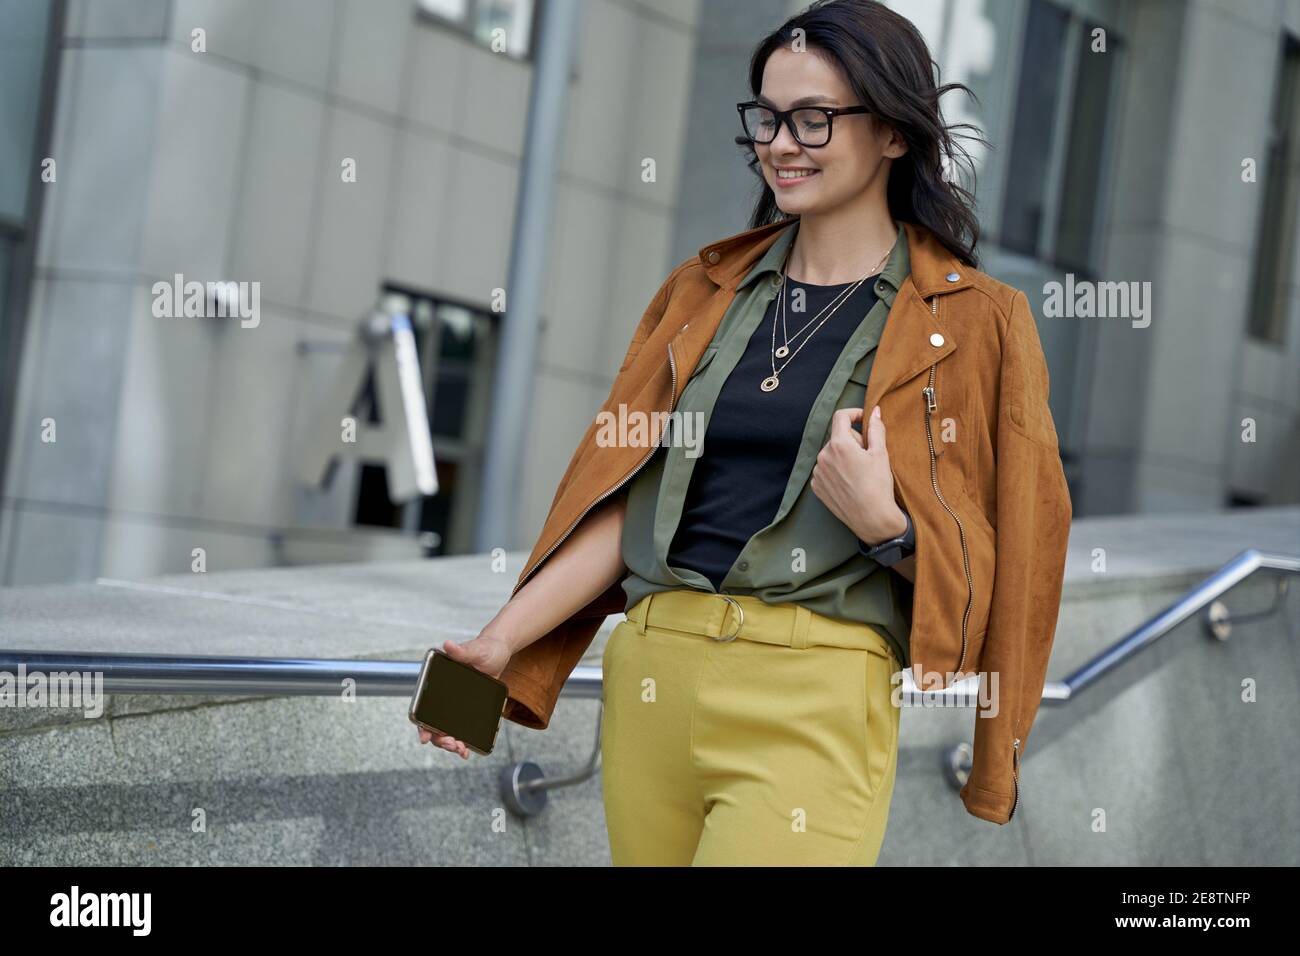 Fashionable girl outdoors. Young beautiful and stylish woman with smartphone in hand walking on the city street and smiling. Urban lifestyle concept, people Stock Photo